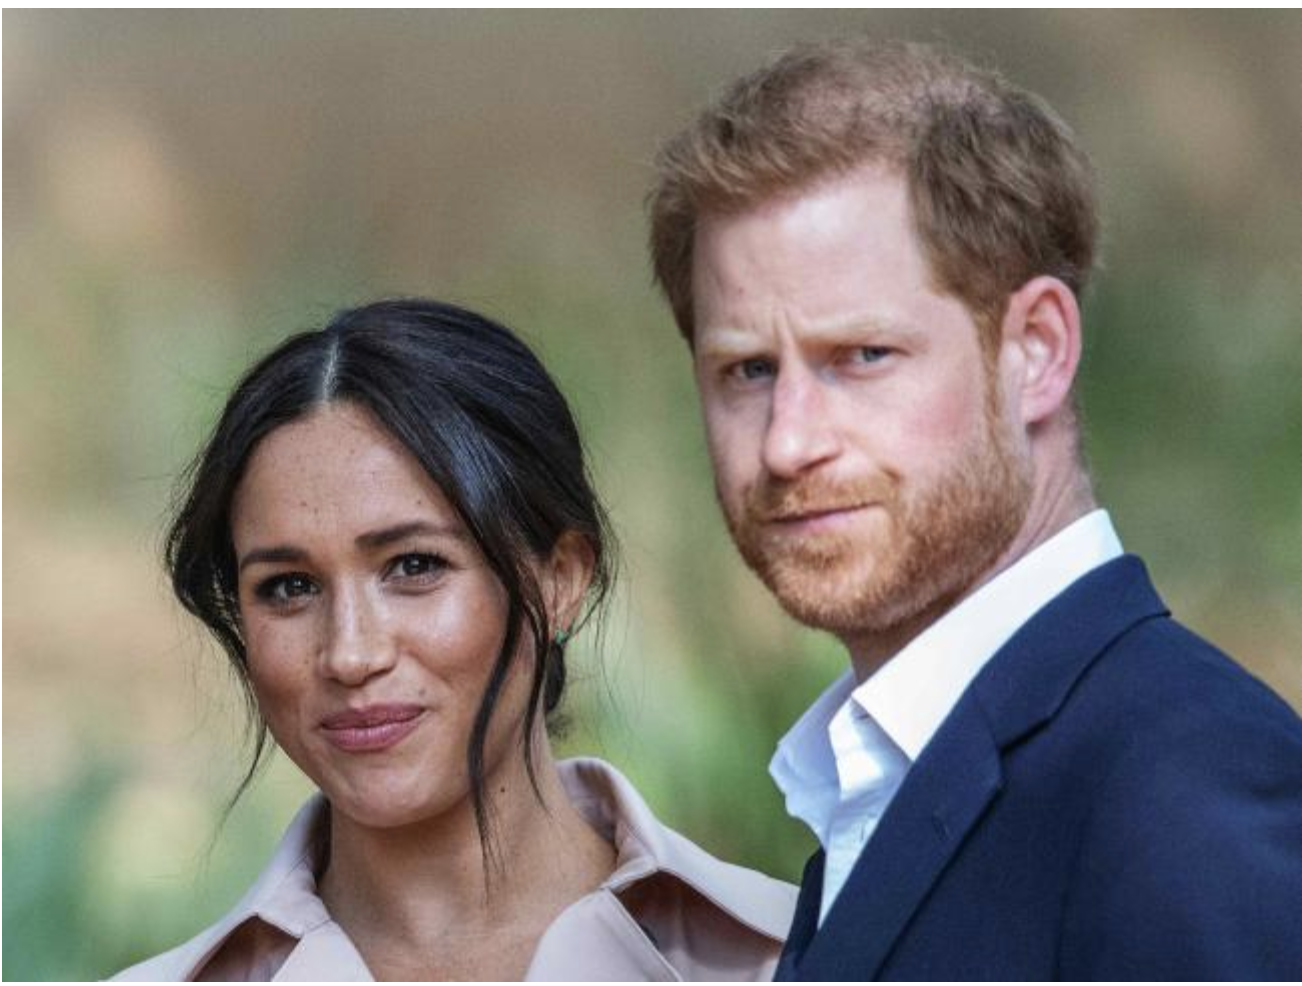  Meghan and Harry cost the British taxpayers $81.9 million in their short combined time in the royal family. Picture: Michele Spatari/AFPSource:AFP